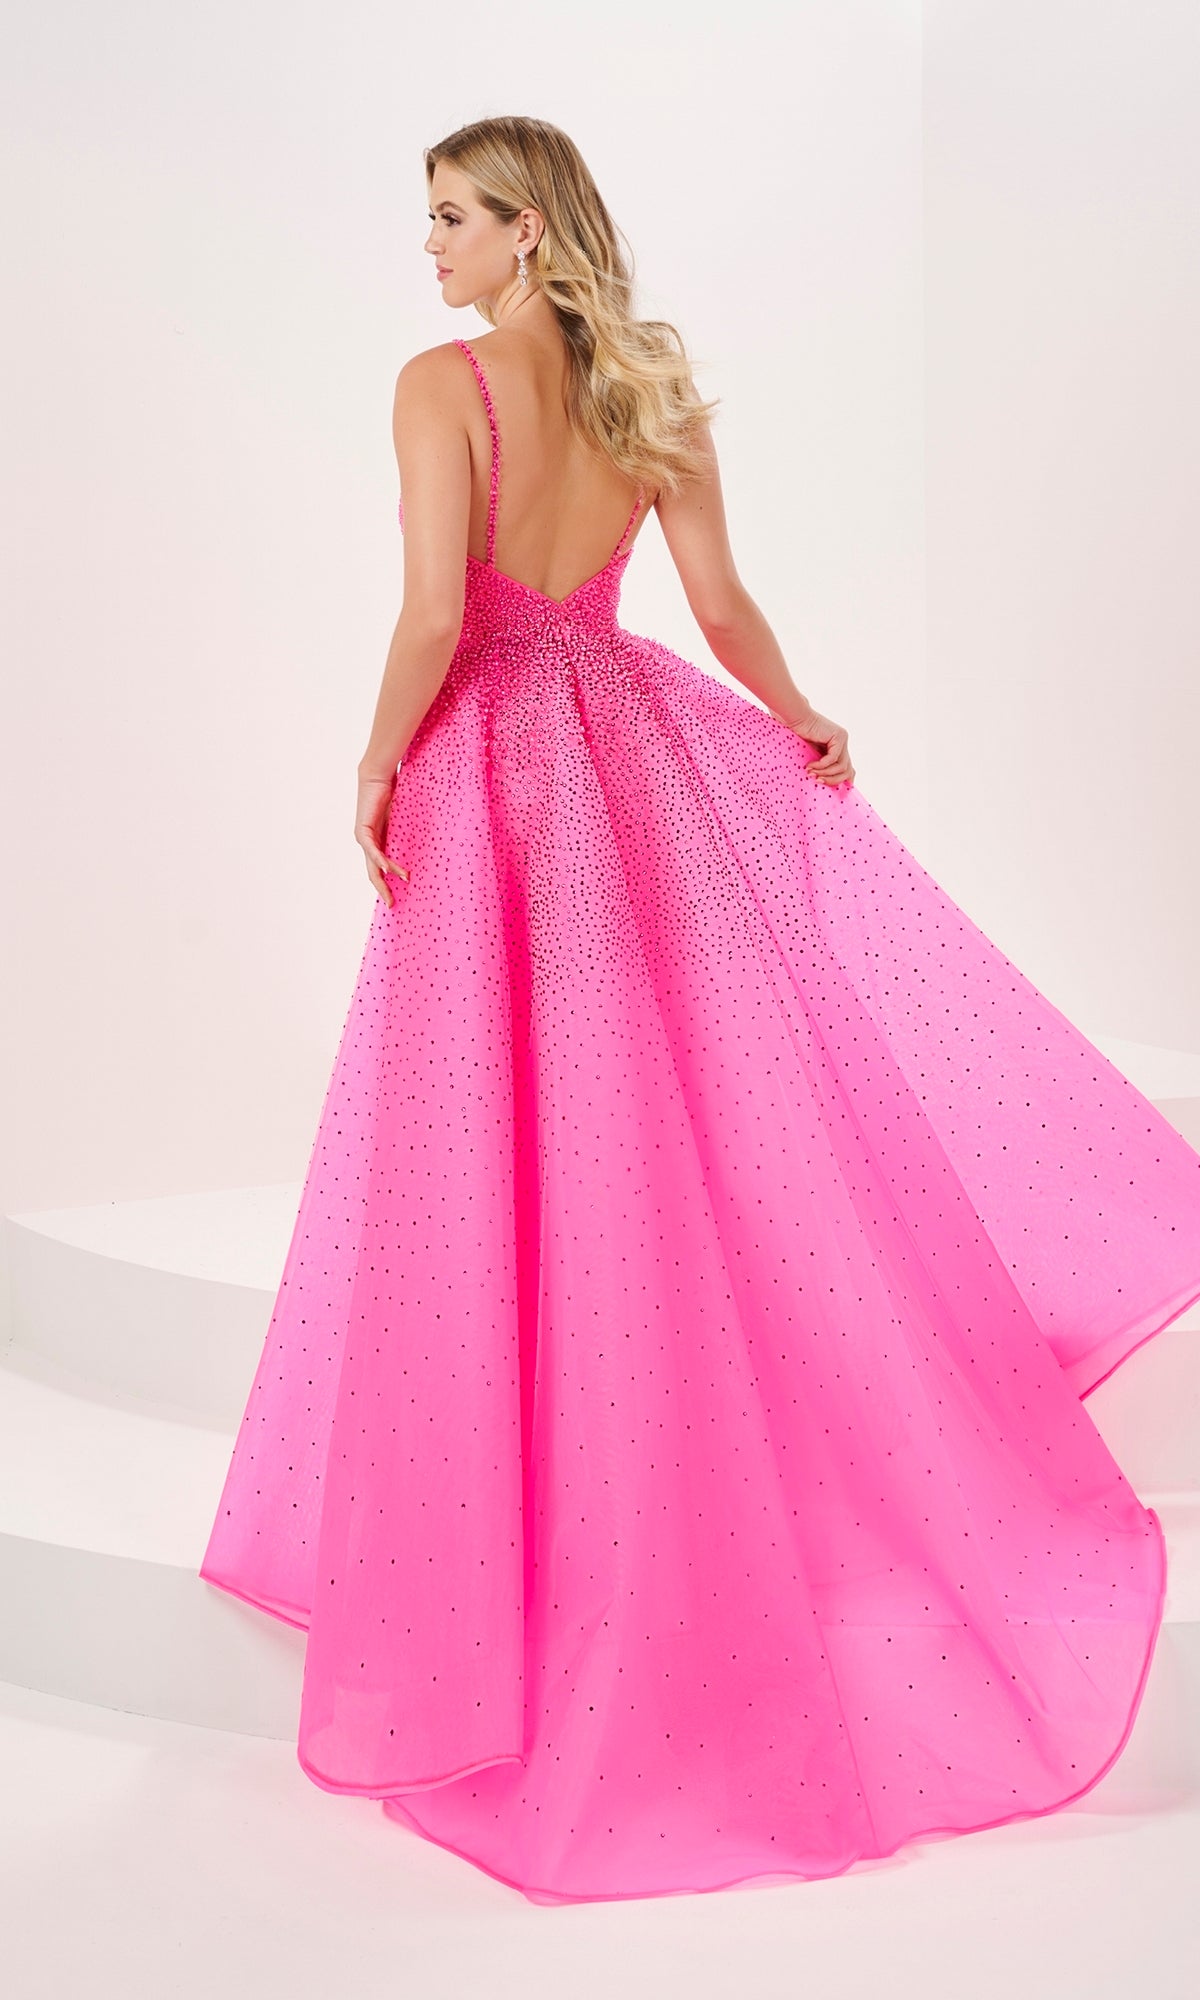 Long Prom Dress 14201 by Panoply